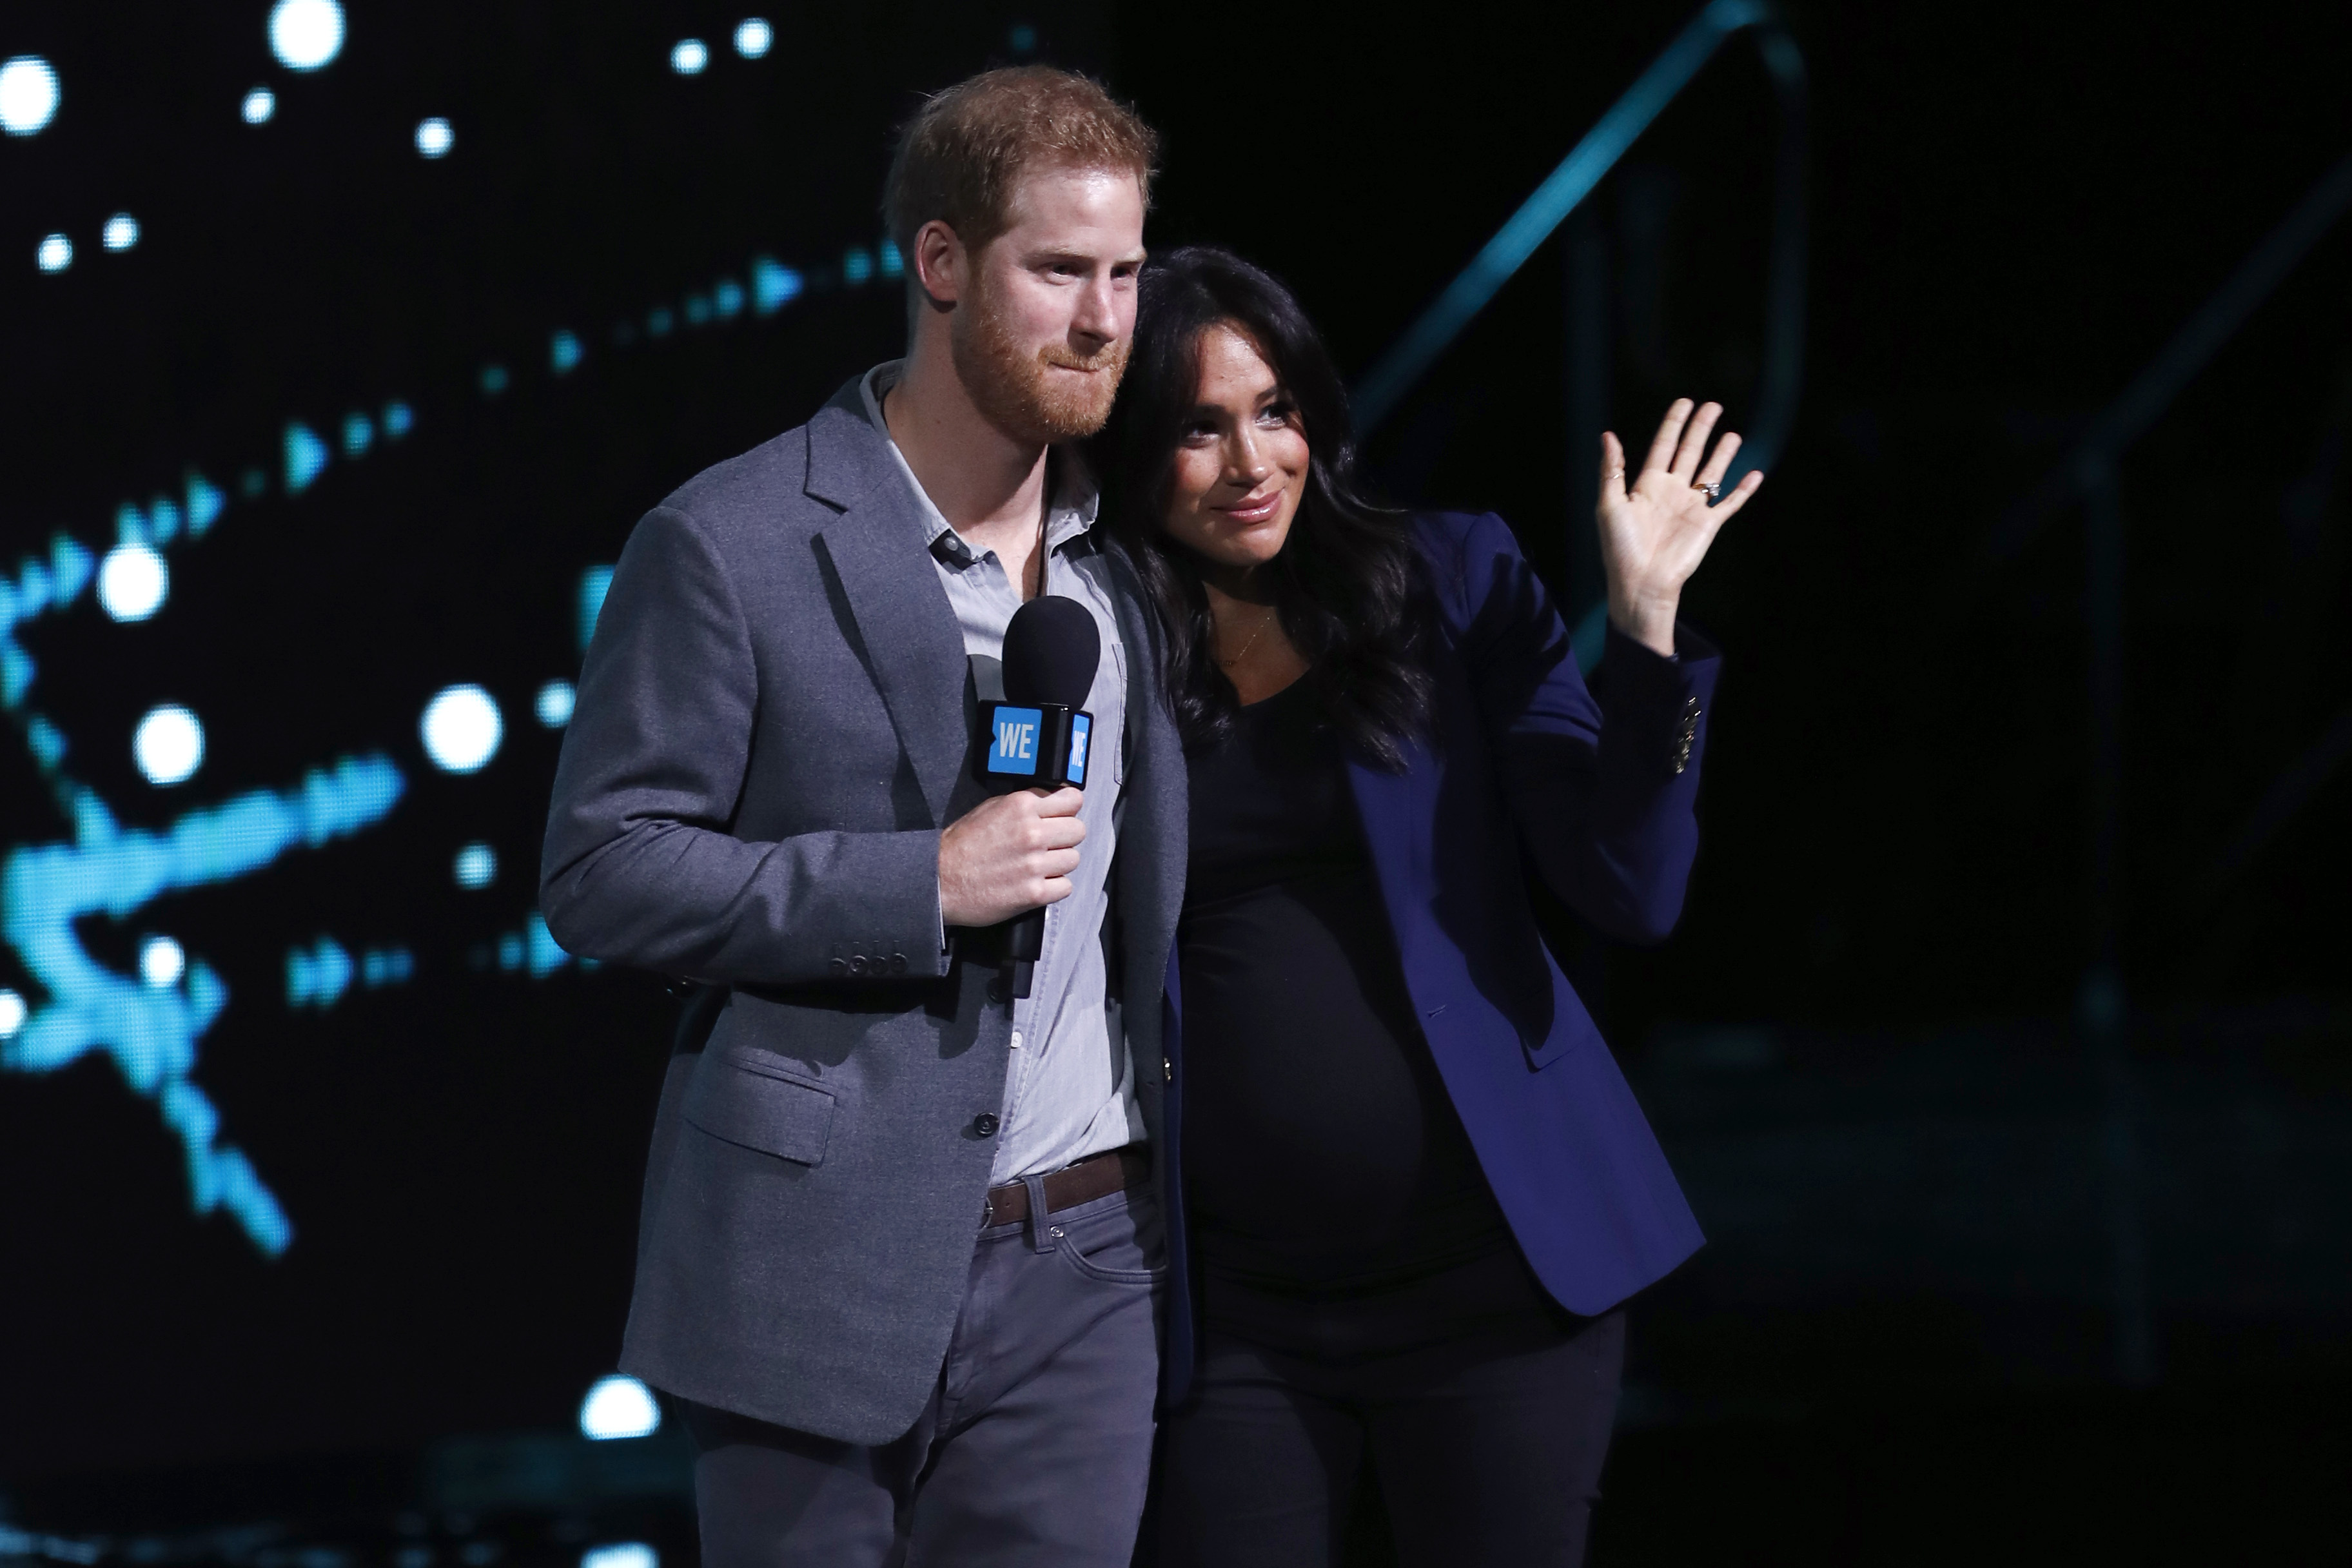 Prince Harry and Meghan Markle (Images: Getty Images)